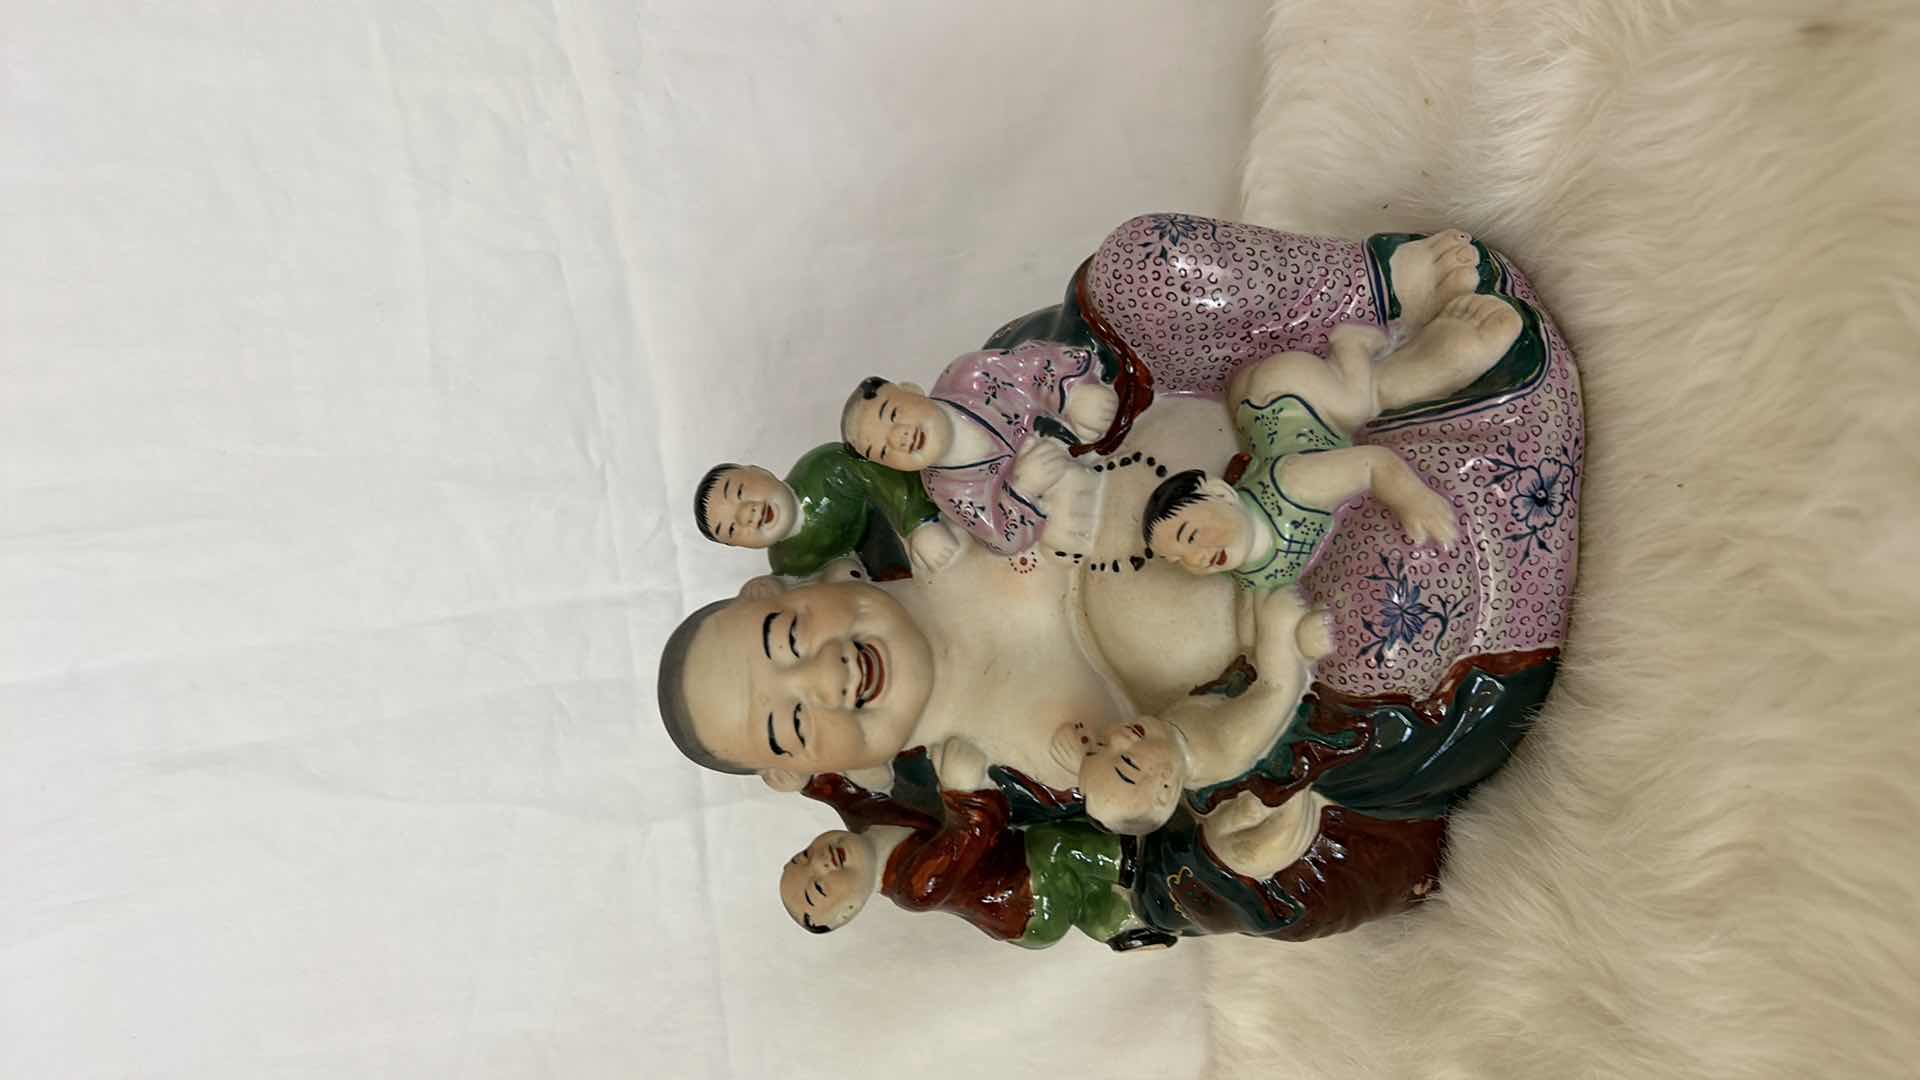 Photo 2 of 3 LAUGHING BUDDAH FIGURINES TALLEST 7.5”